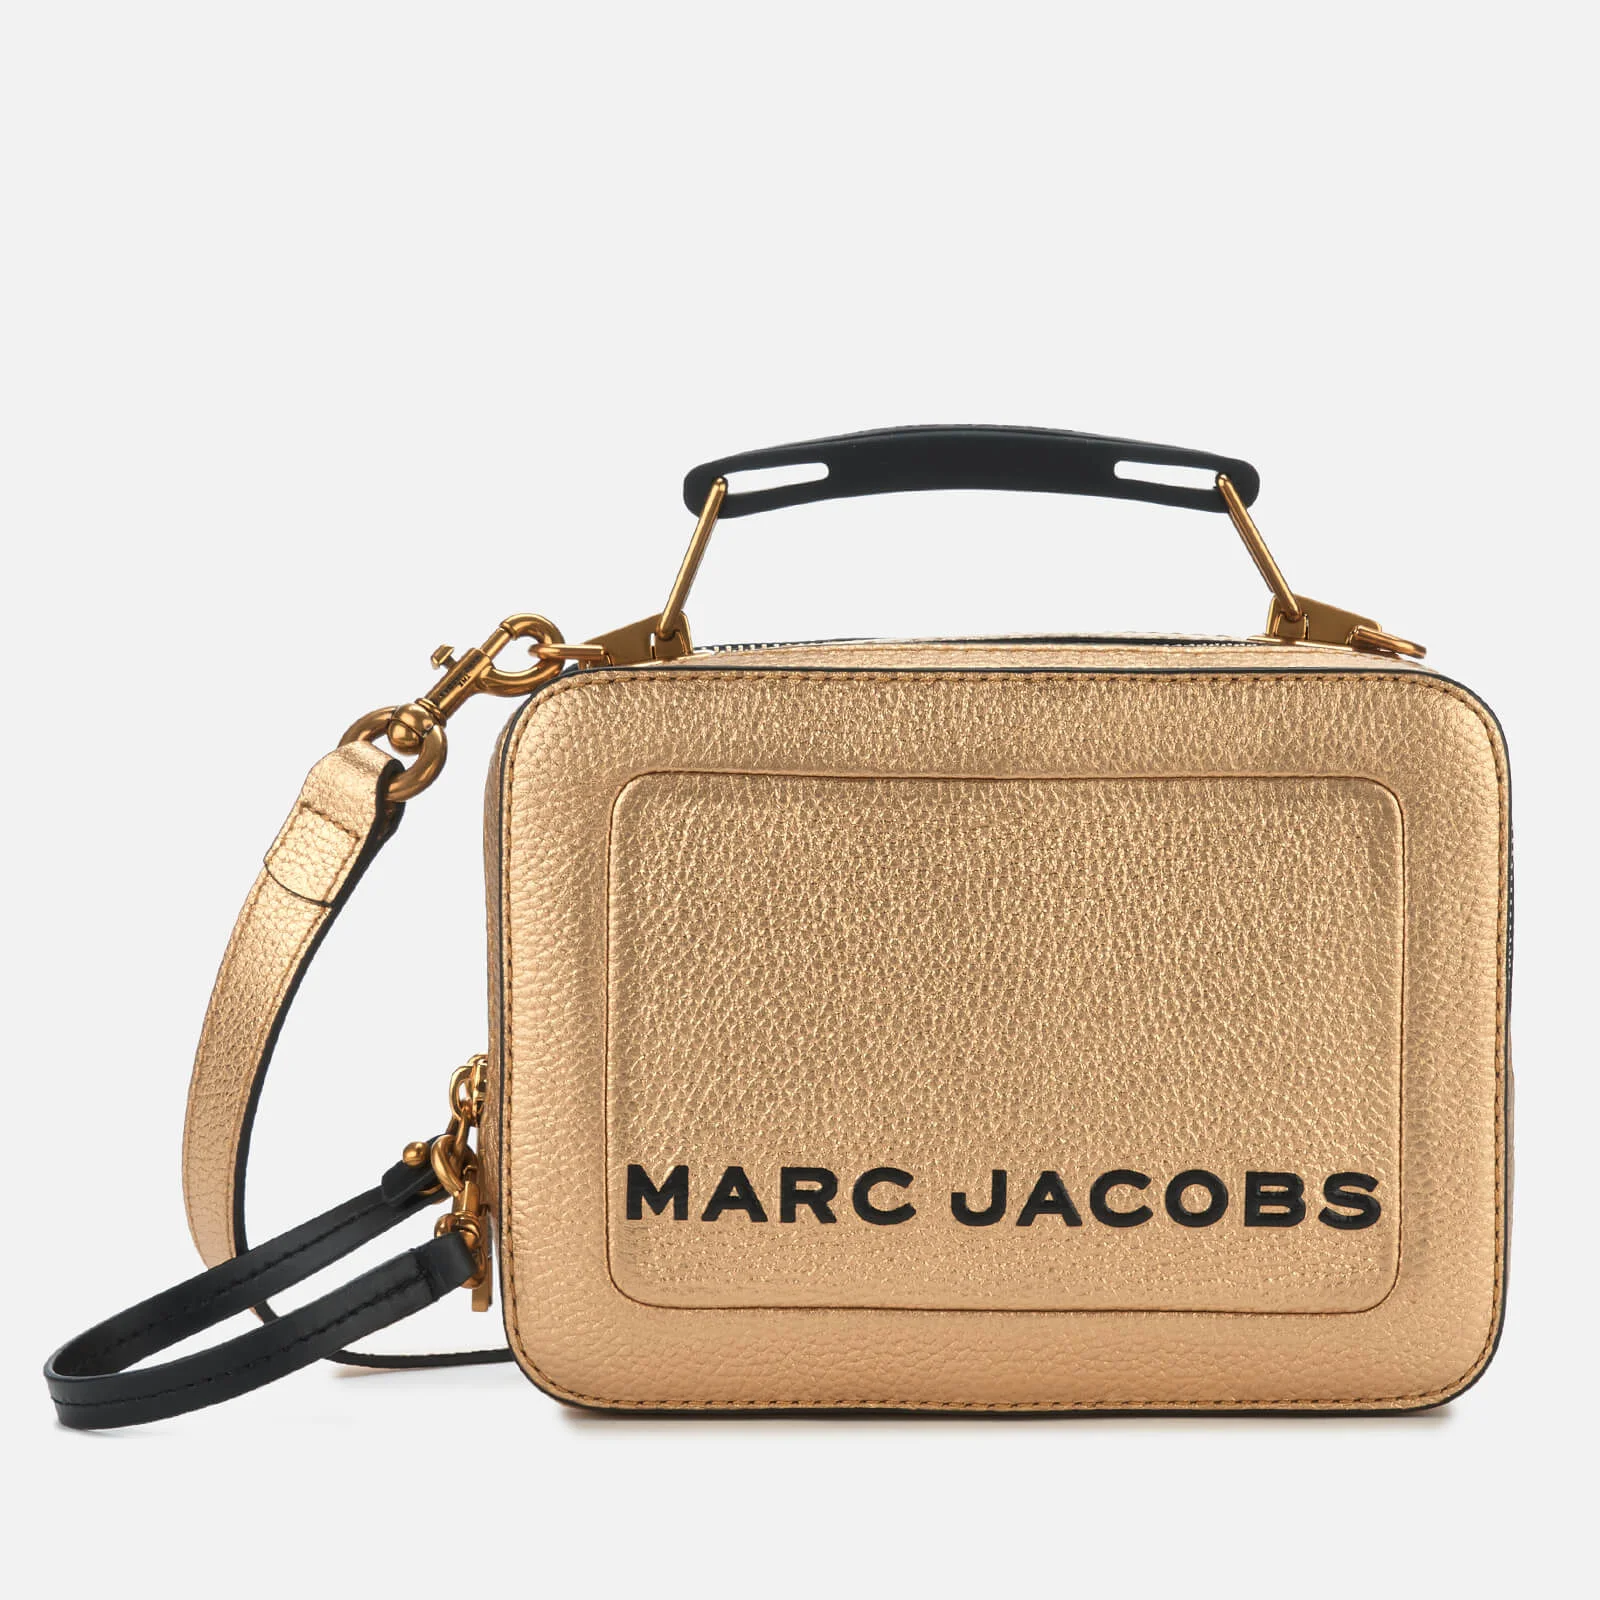 Marc Jacobs Women's The Box 20 Bag - Gold Image 1